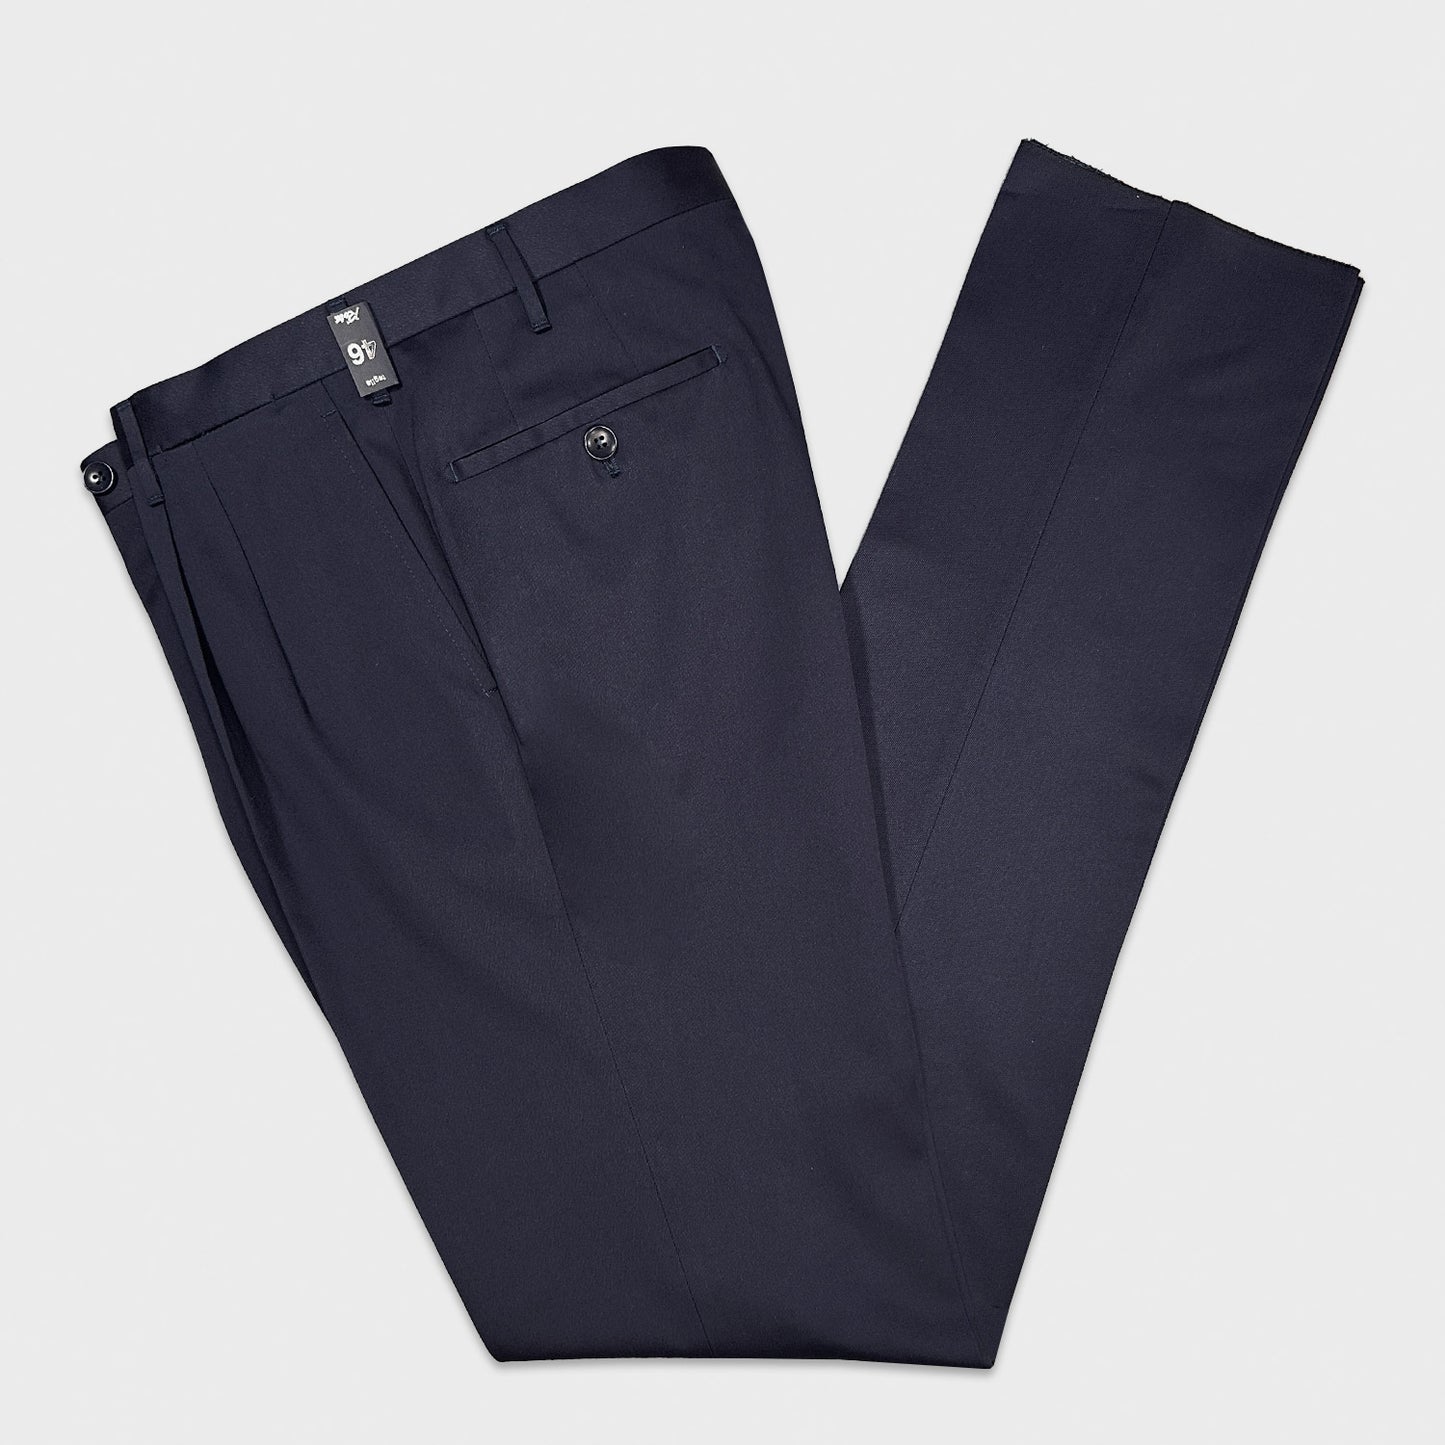 Rota Men's Trousers Double Pleats Cotton Twill Navy Blue-Wools Boutique Uomo